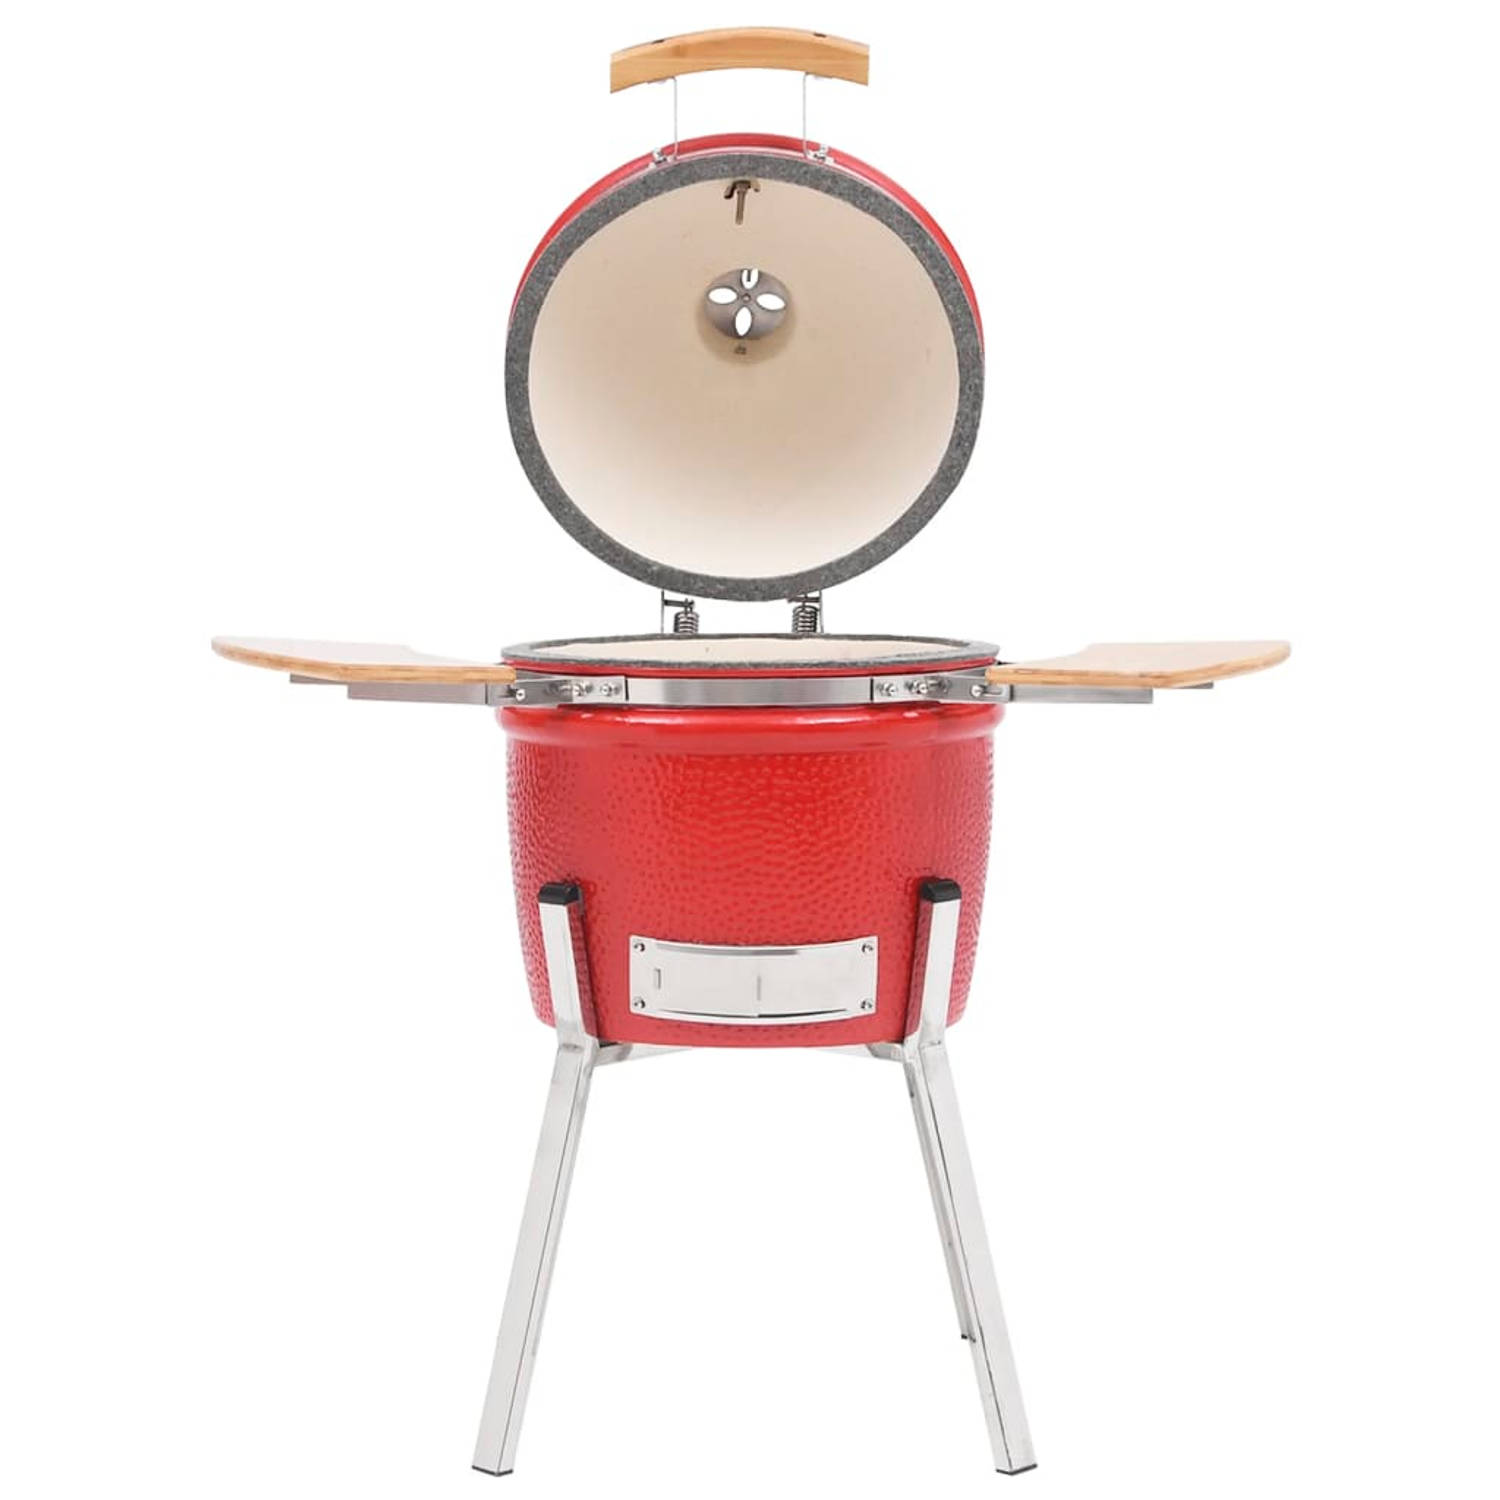 The Living Store Kamado Grill Keramisch 33 cm Inclusief thermometer